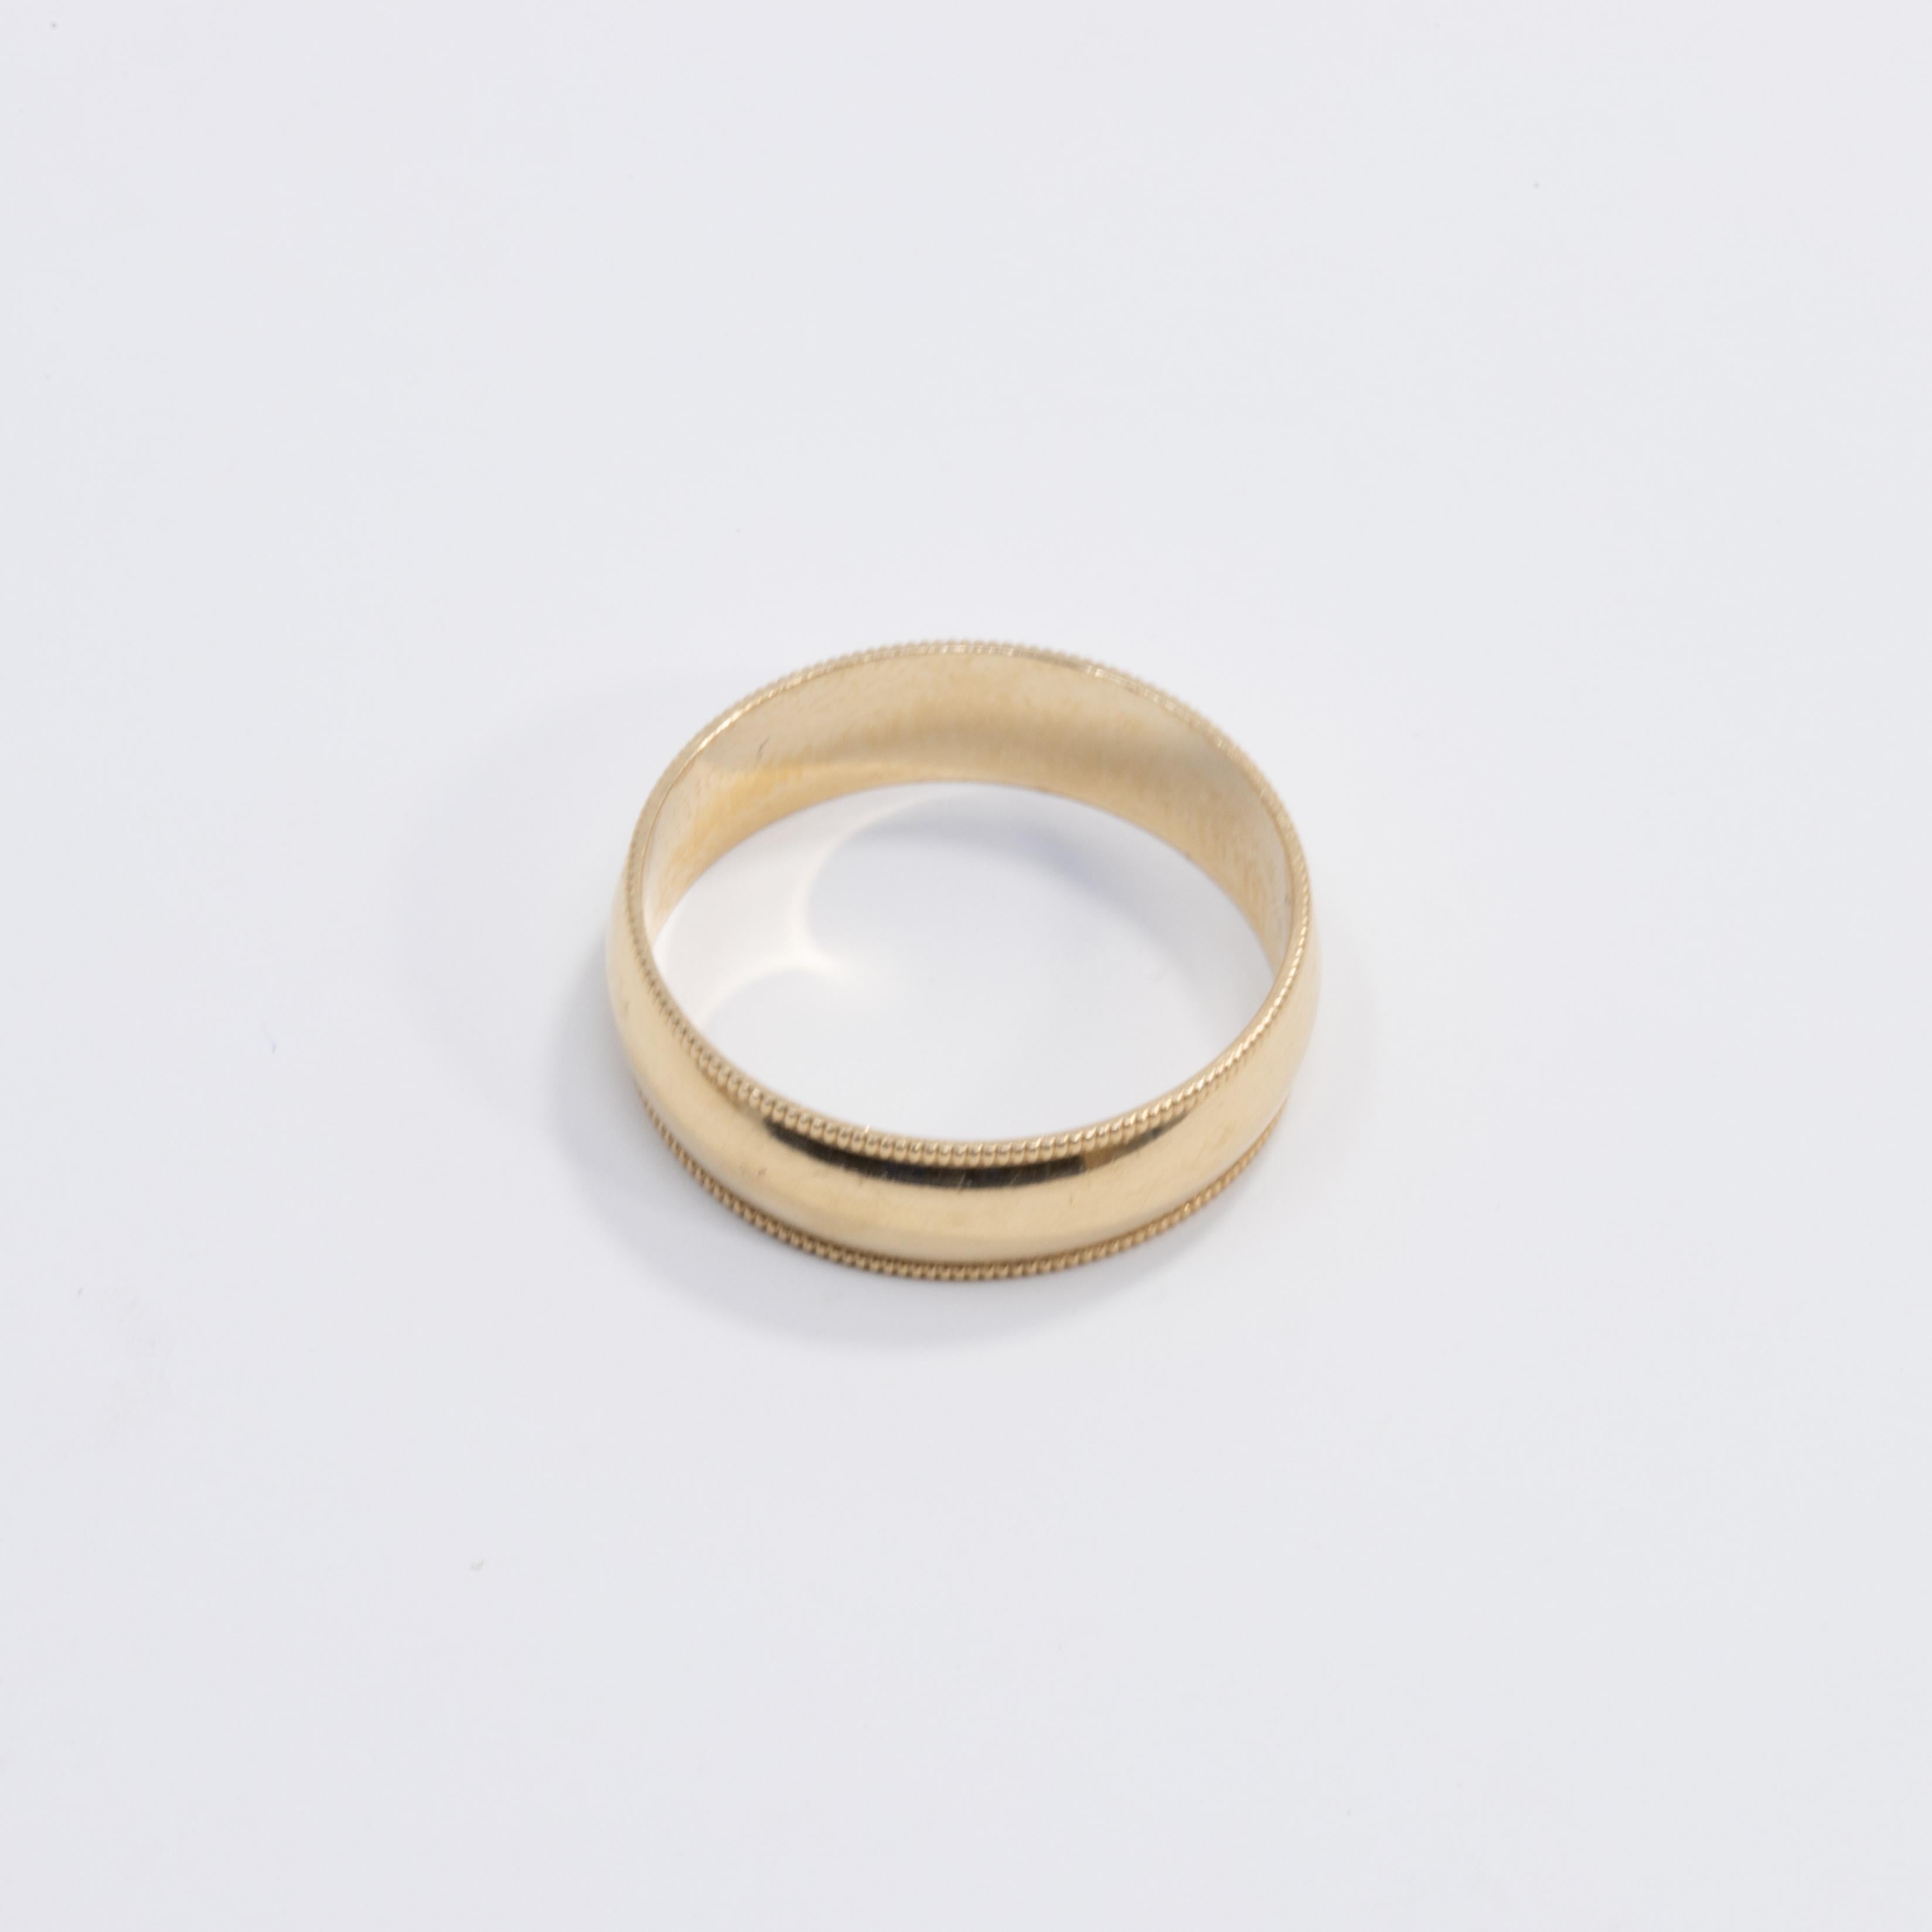 A finely detailed men's 14K yellow gold wedding band. Perfect for the important moments in your life, and as a stylish accessory.

Ring Size US 5.75
Height 5 mm